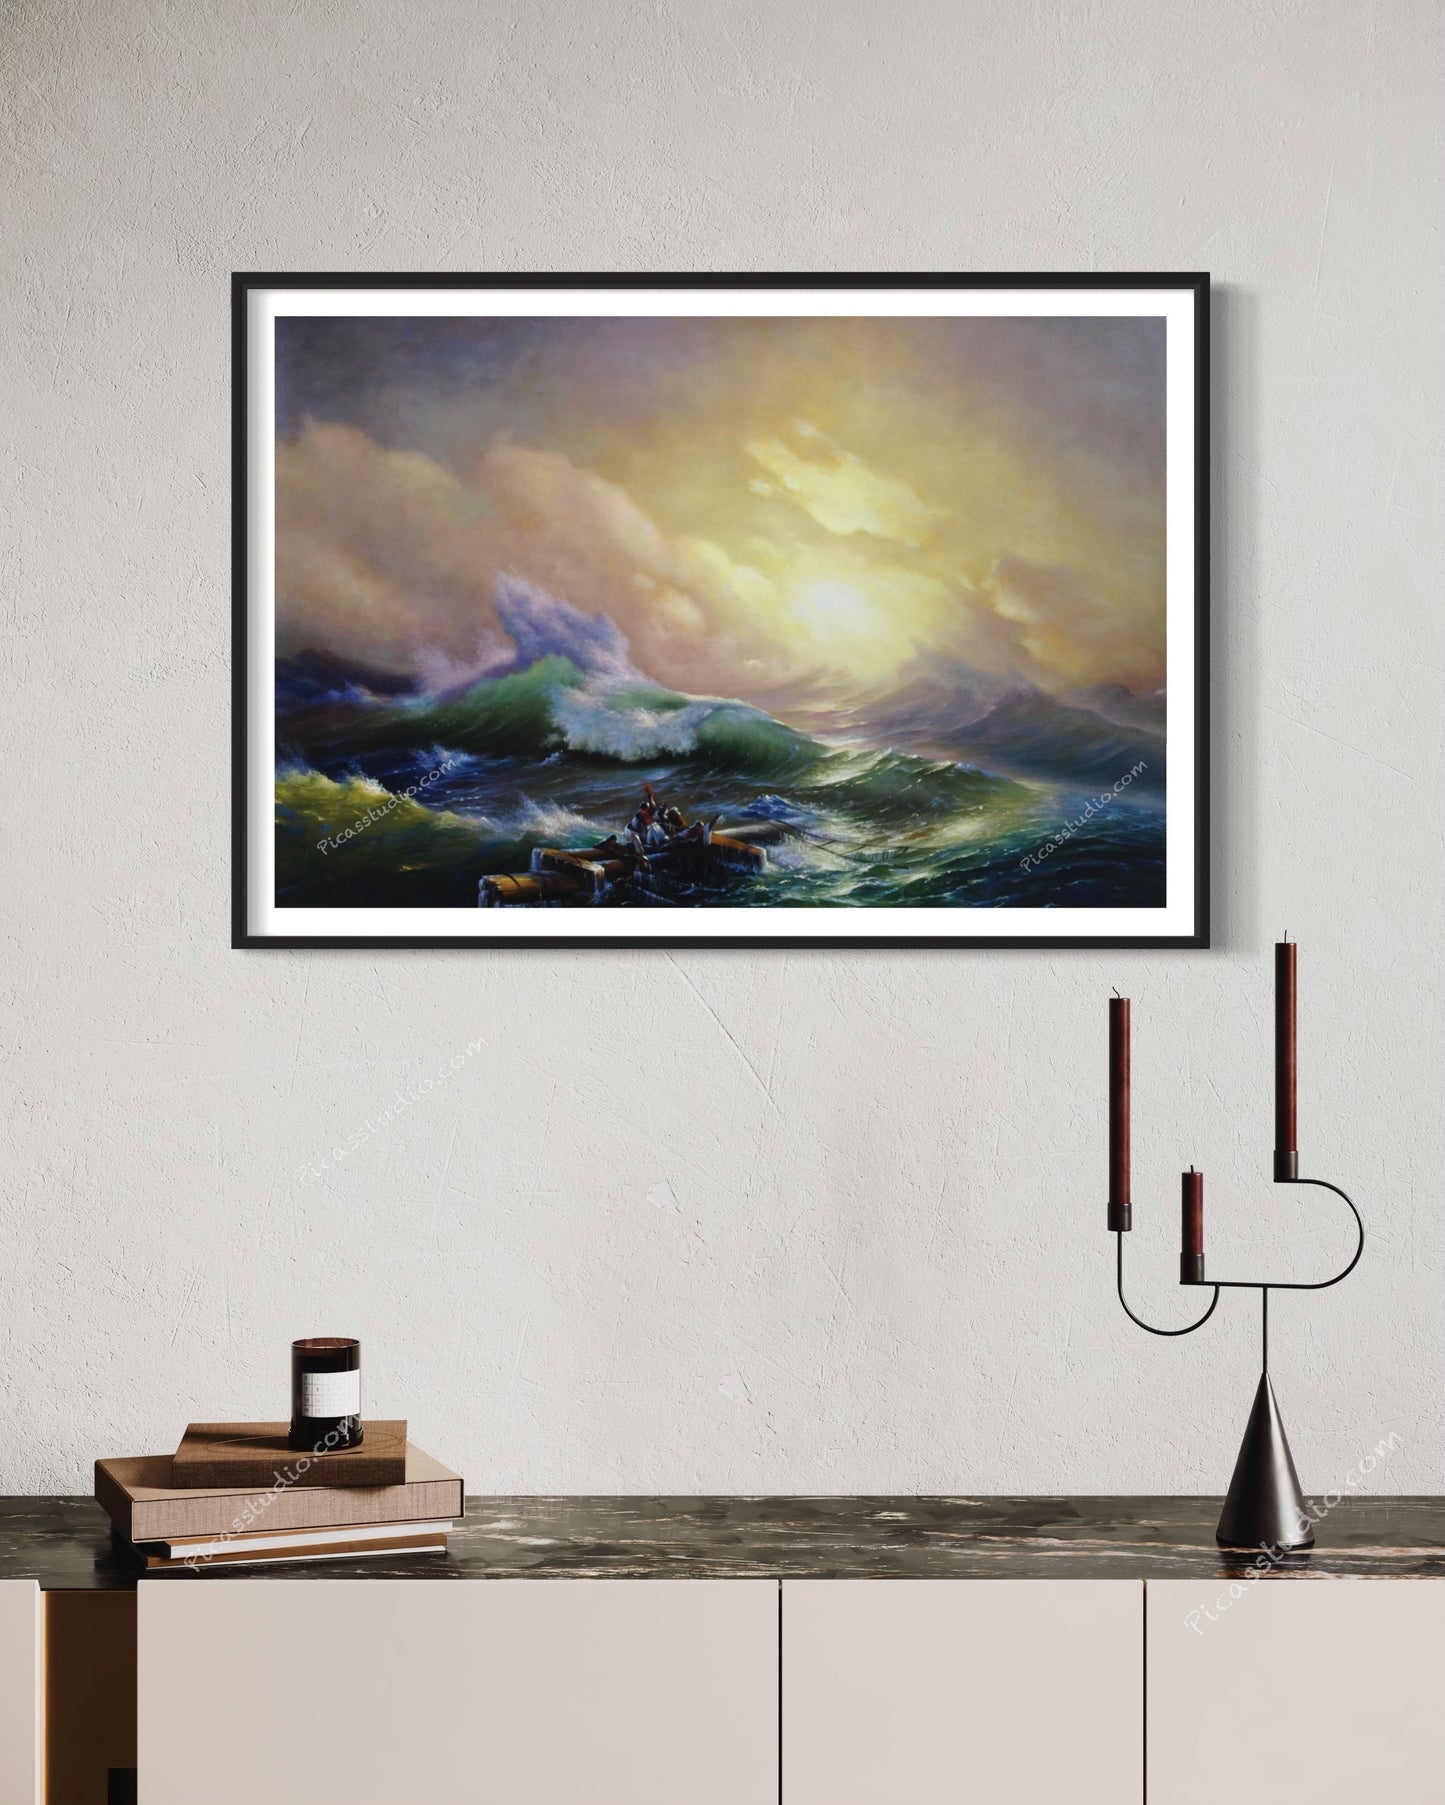 The Ninth Wave by Ivan Aivazovsky Oil Painting Hand Painted Art on Canvas Wall Decor Unframed